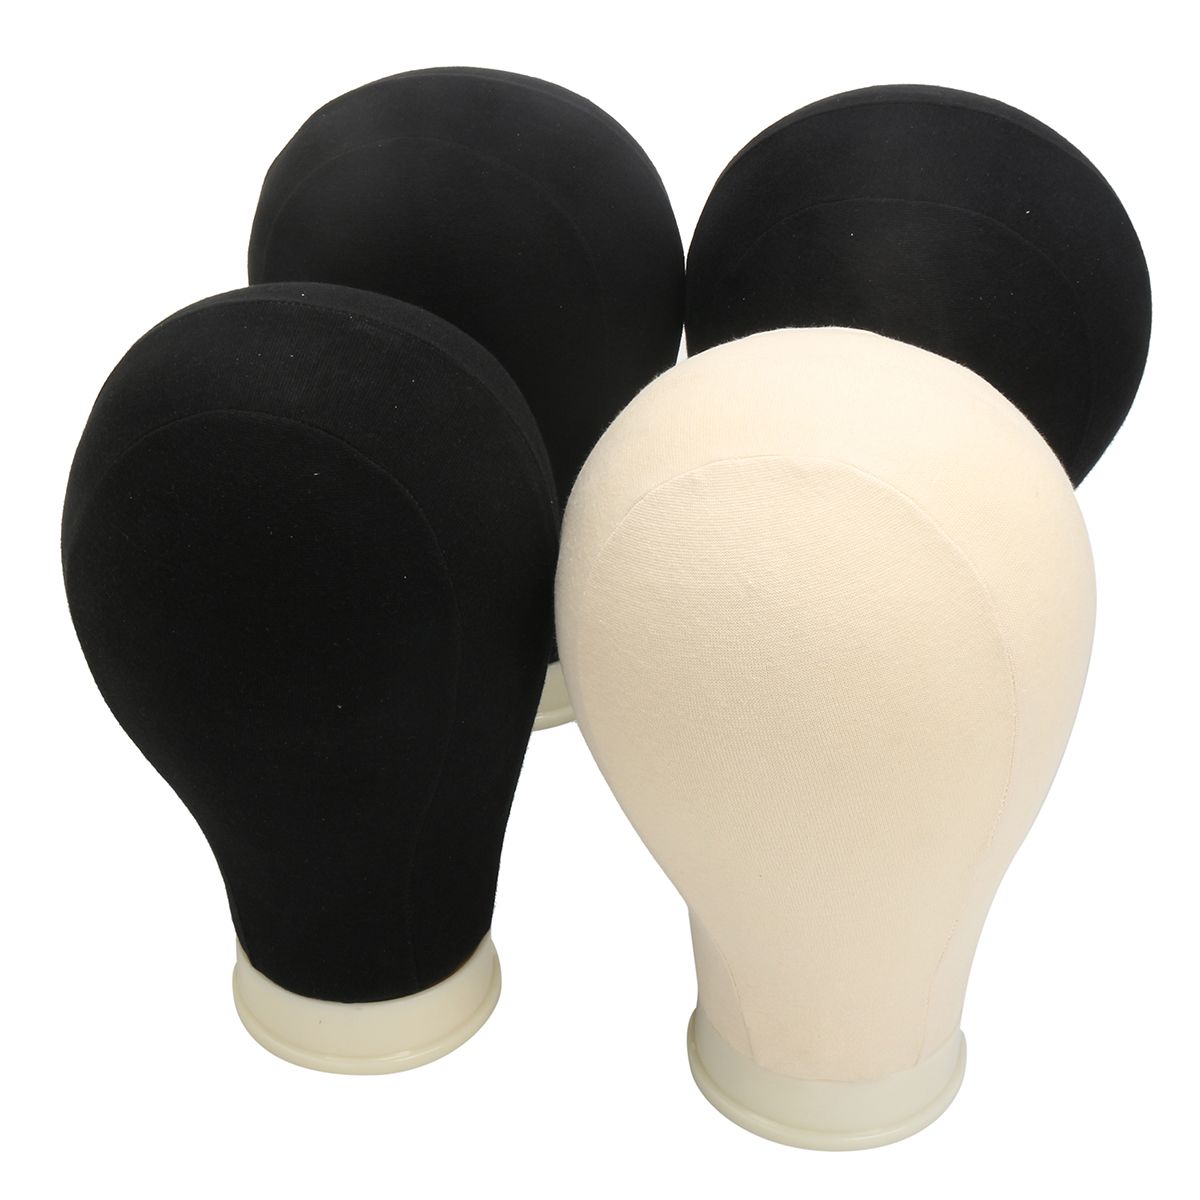 20-25-Canvas-Block-Head-Set-with-Mount-Hole-Plate-Mannequin-Model-Cap-Wigs-Jewelry-Display-Stand-1445404